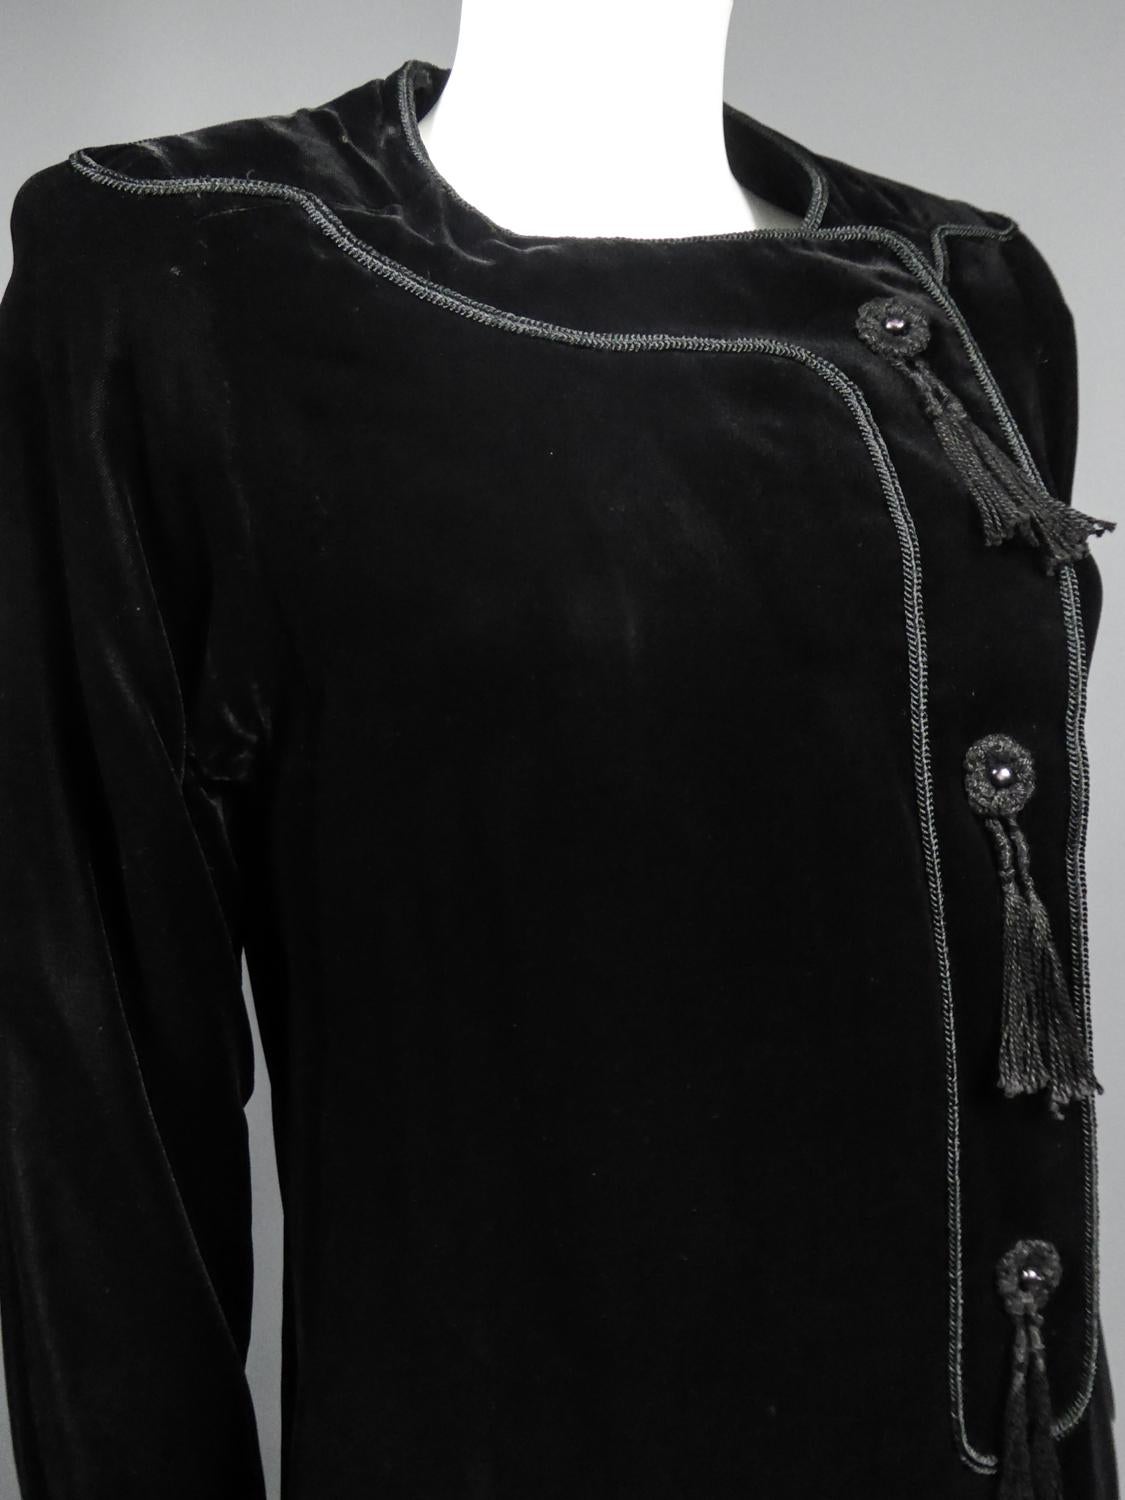 A french Couture Emanuel Ungaro Little Black Dress Number 4383-10-76 Circa 1976 For Sale 7